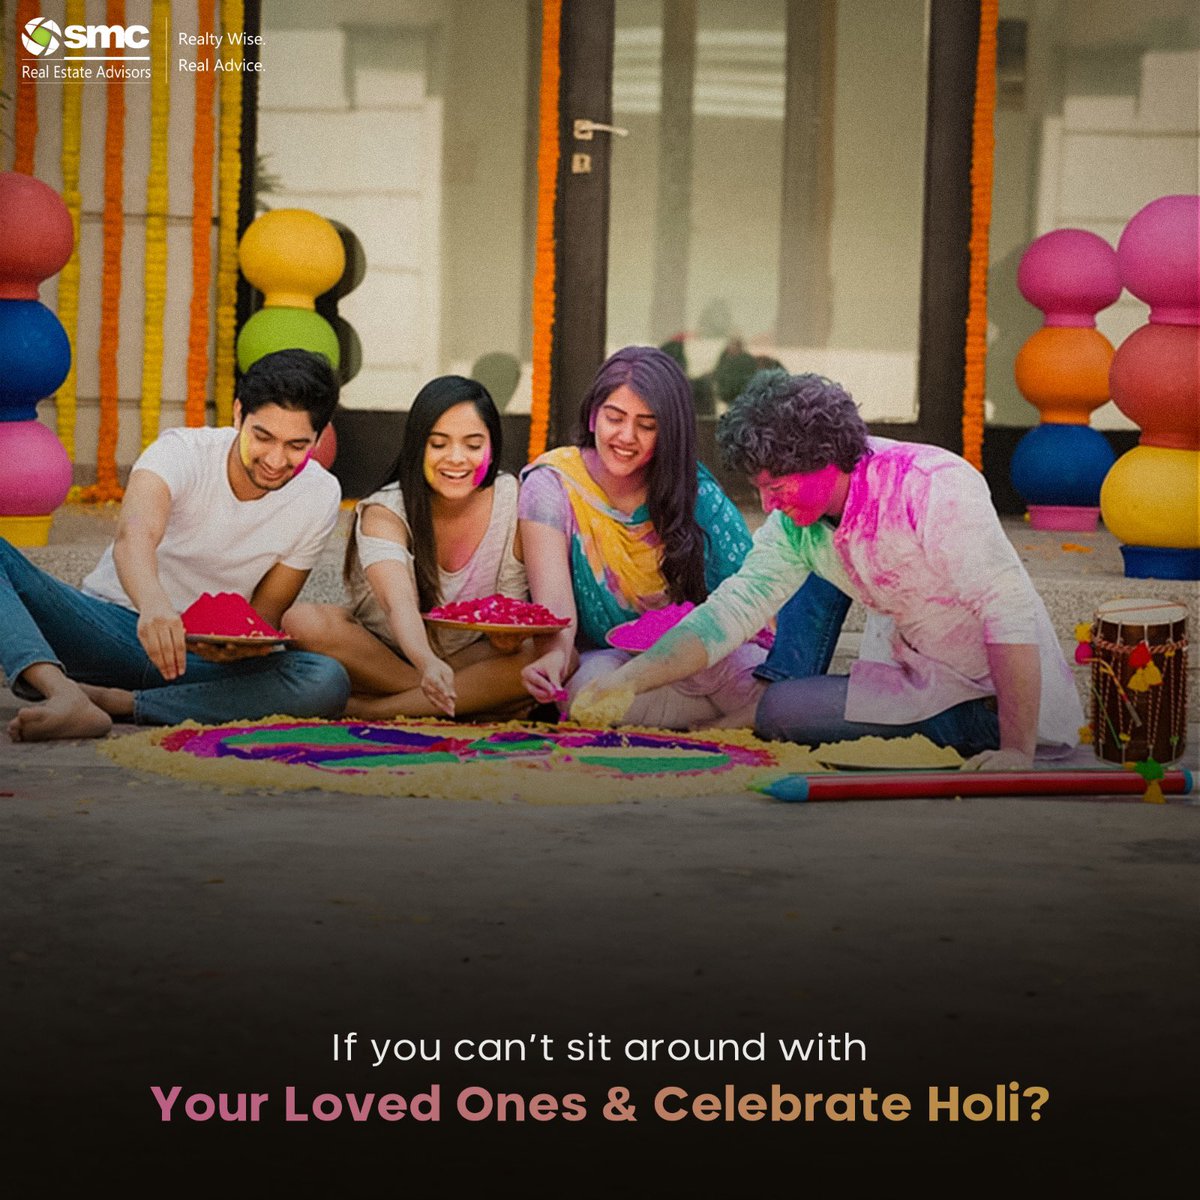 It's not the grandeur of a spacious verandah that brings life, but the colorful bonds we share within🏠 . . More to be revealed soon! #YouMakeTheHomeColourful 🎨 . . . . . . . #SMCRealty #RealEstateIndia #Holi2024 #HappyHoli2024 #ColoursOfIndia #ColourfulIndia #Colours2024